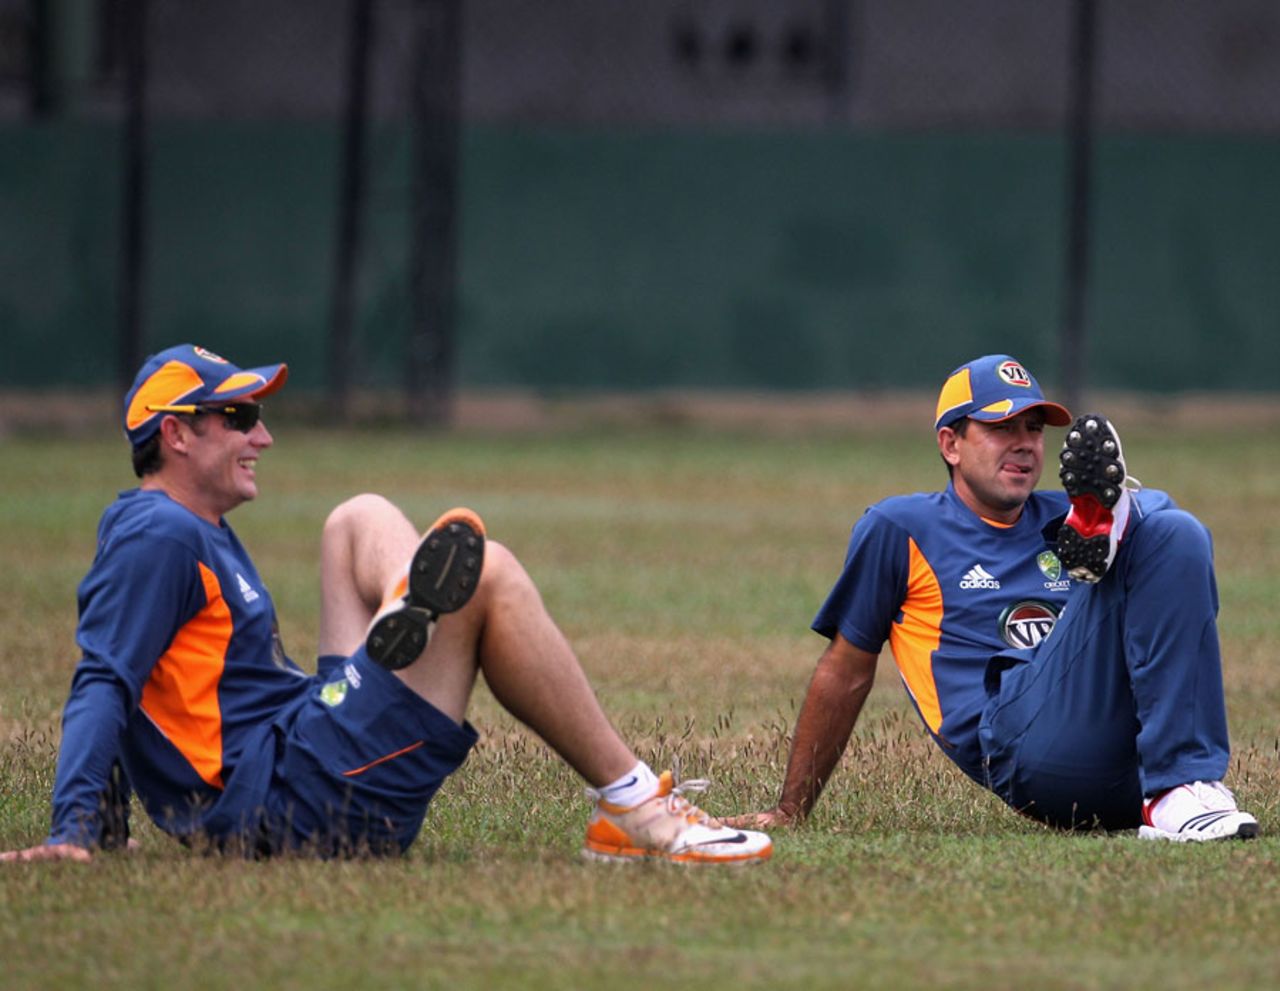 David Hussey and Ricky Ponting warm up during practice, Colombo, March 3, 2011